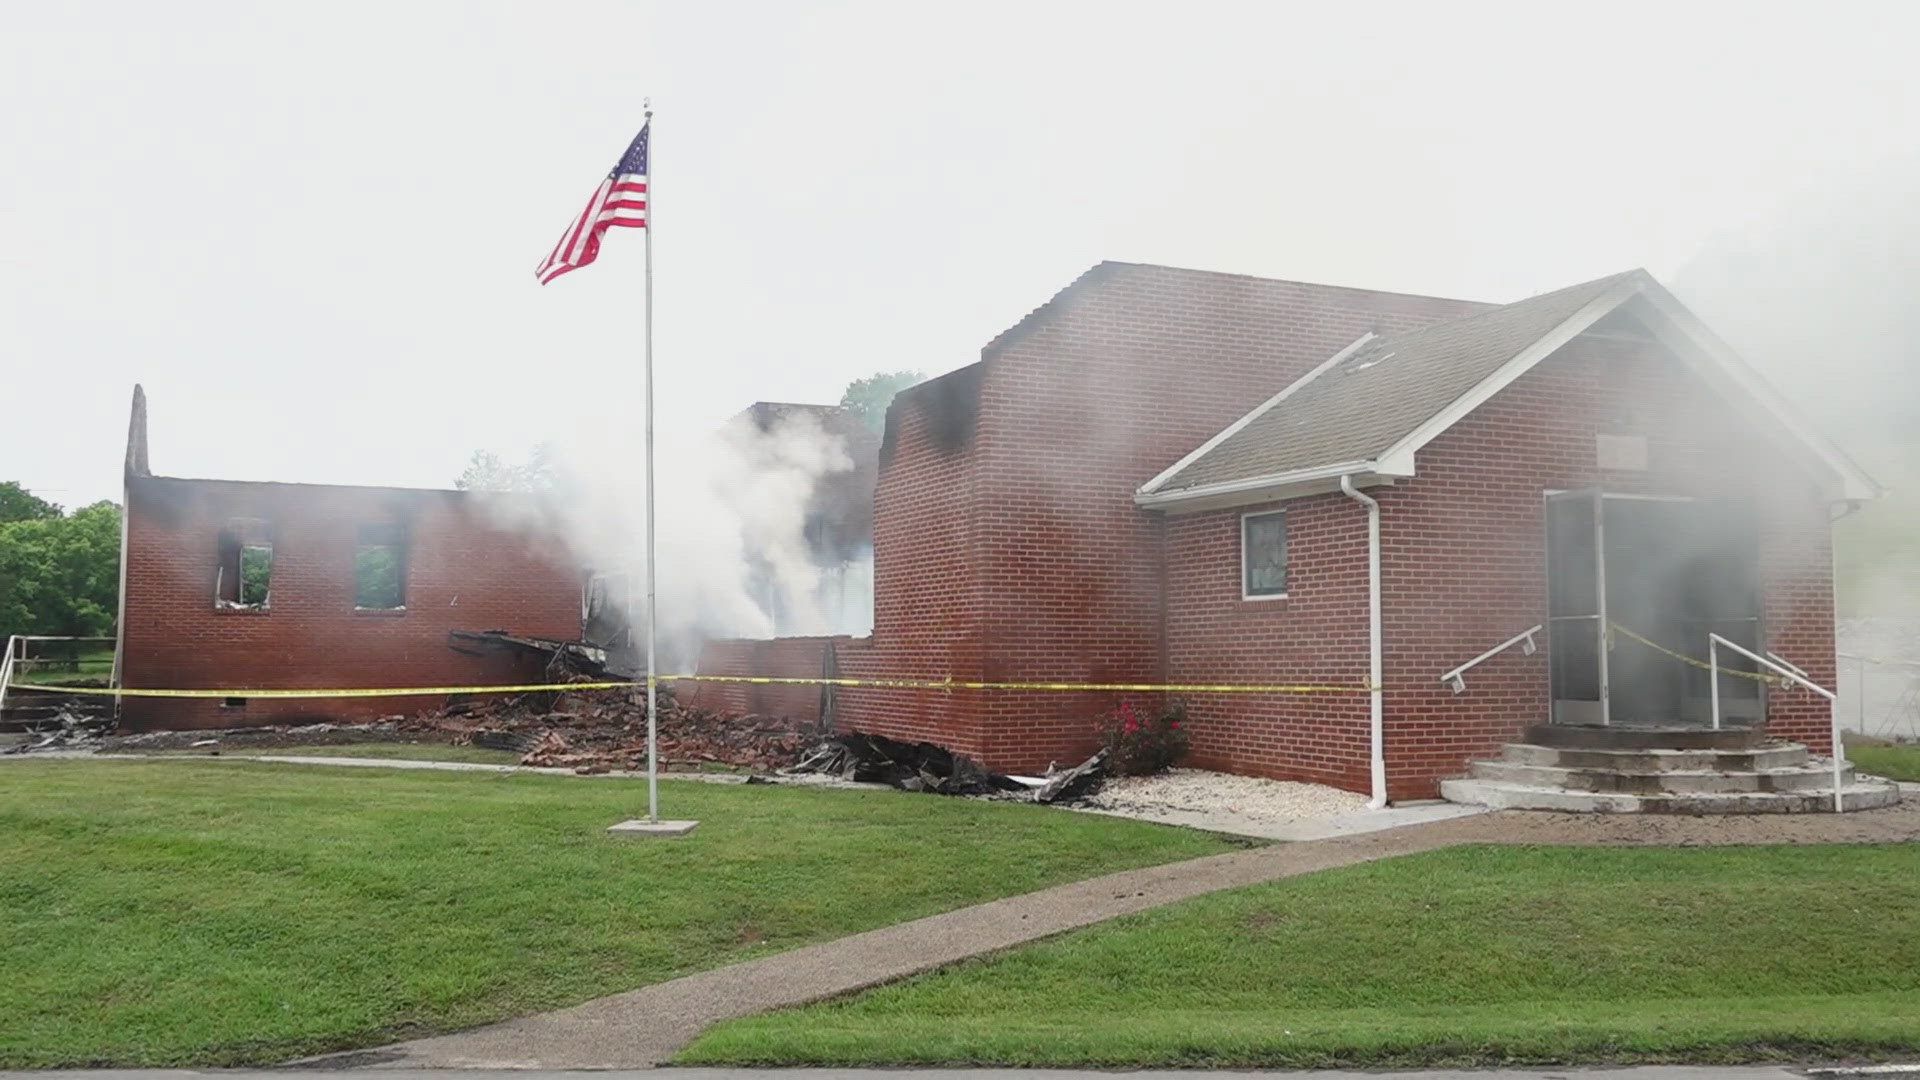 According to the Springdale Volunteer Fire Department chief, crews worked more than eight hours to put out the fire.